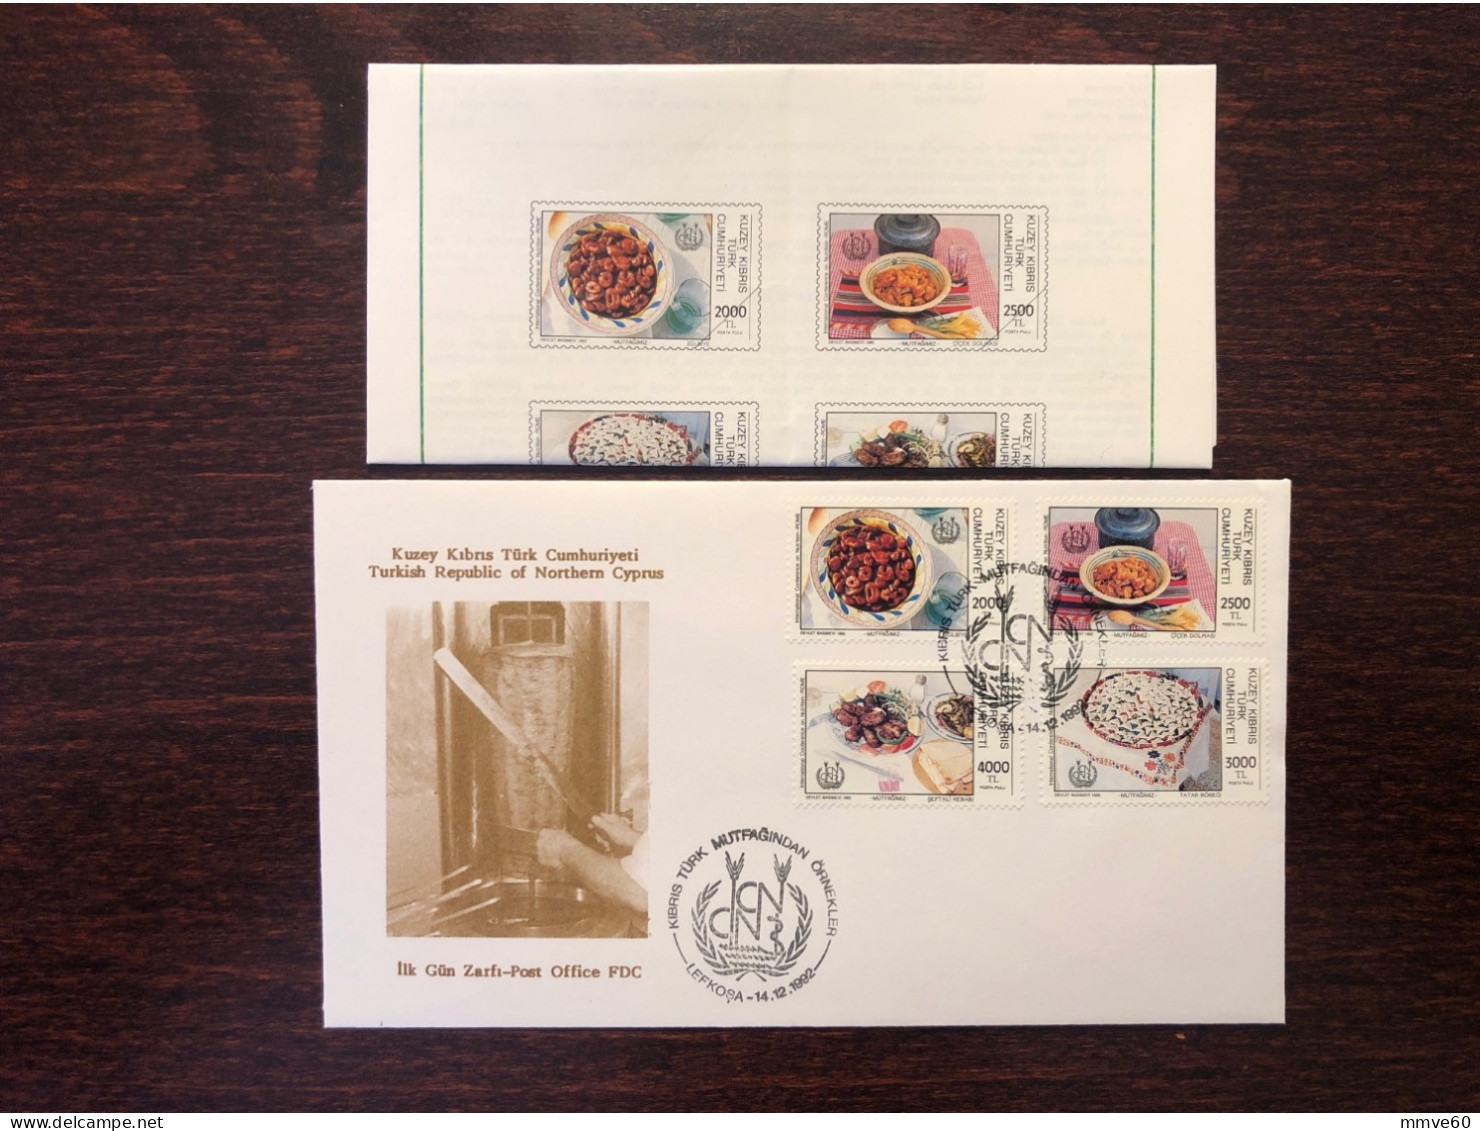 CYPRUS TURKISH FDC COVER 1992 YEAR WHO FAO NUTRITIONS HEALTH MEDICINE STAMPS - Briefe U. Dokumente